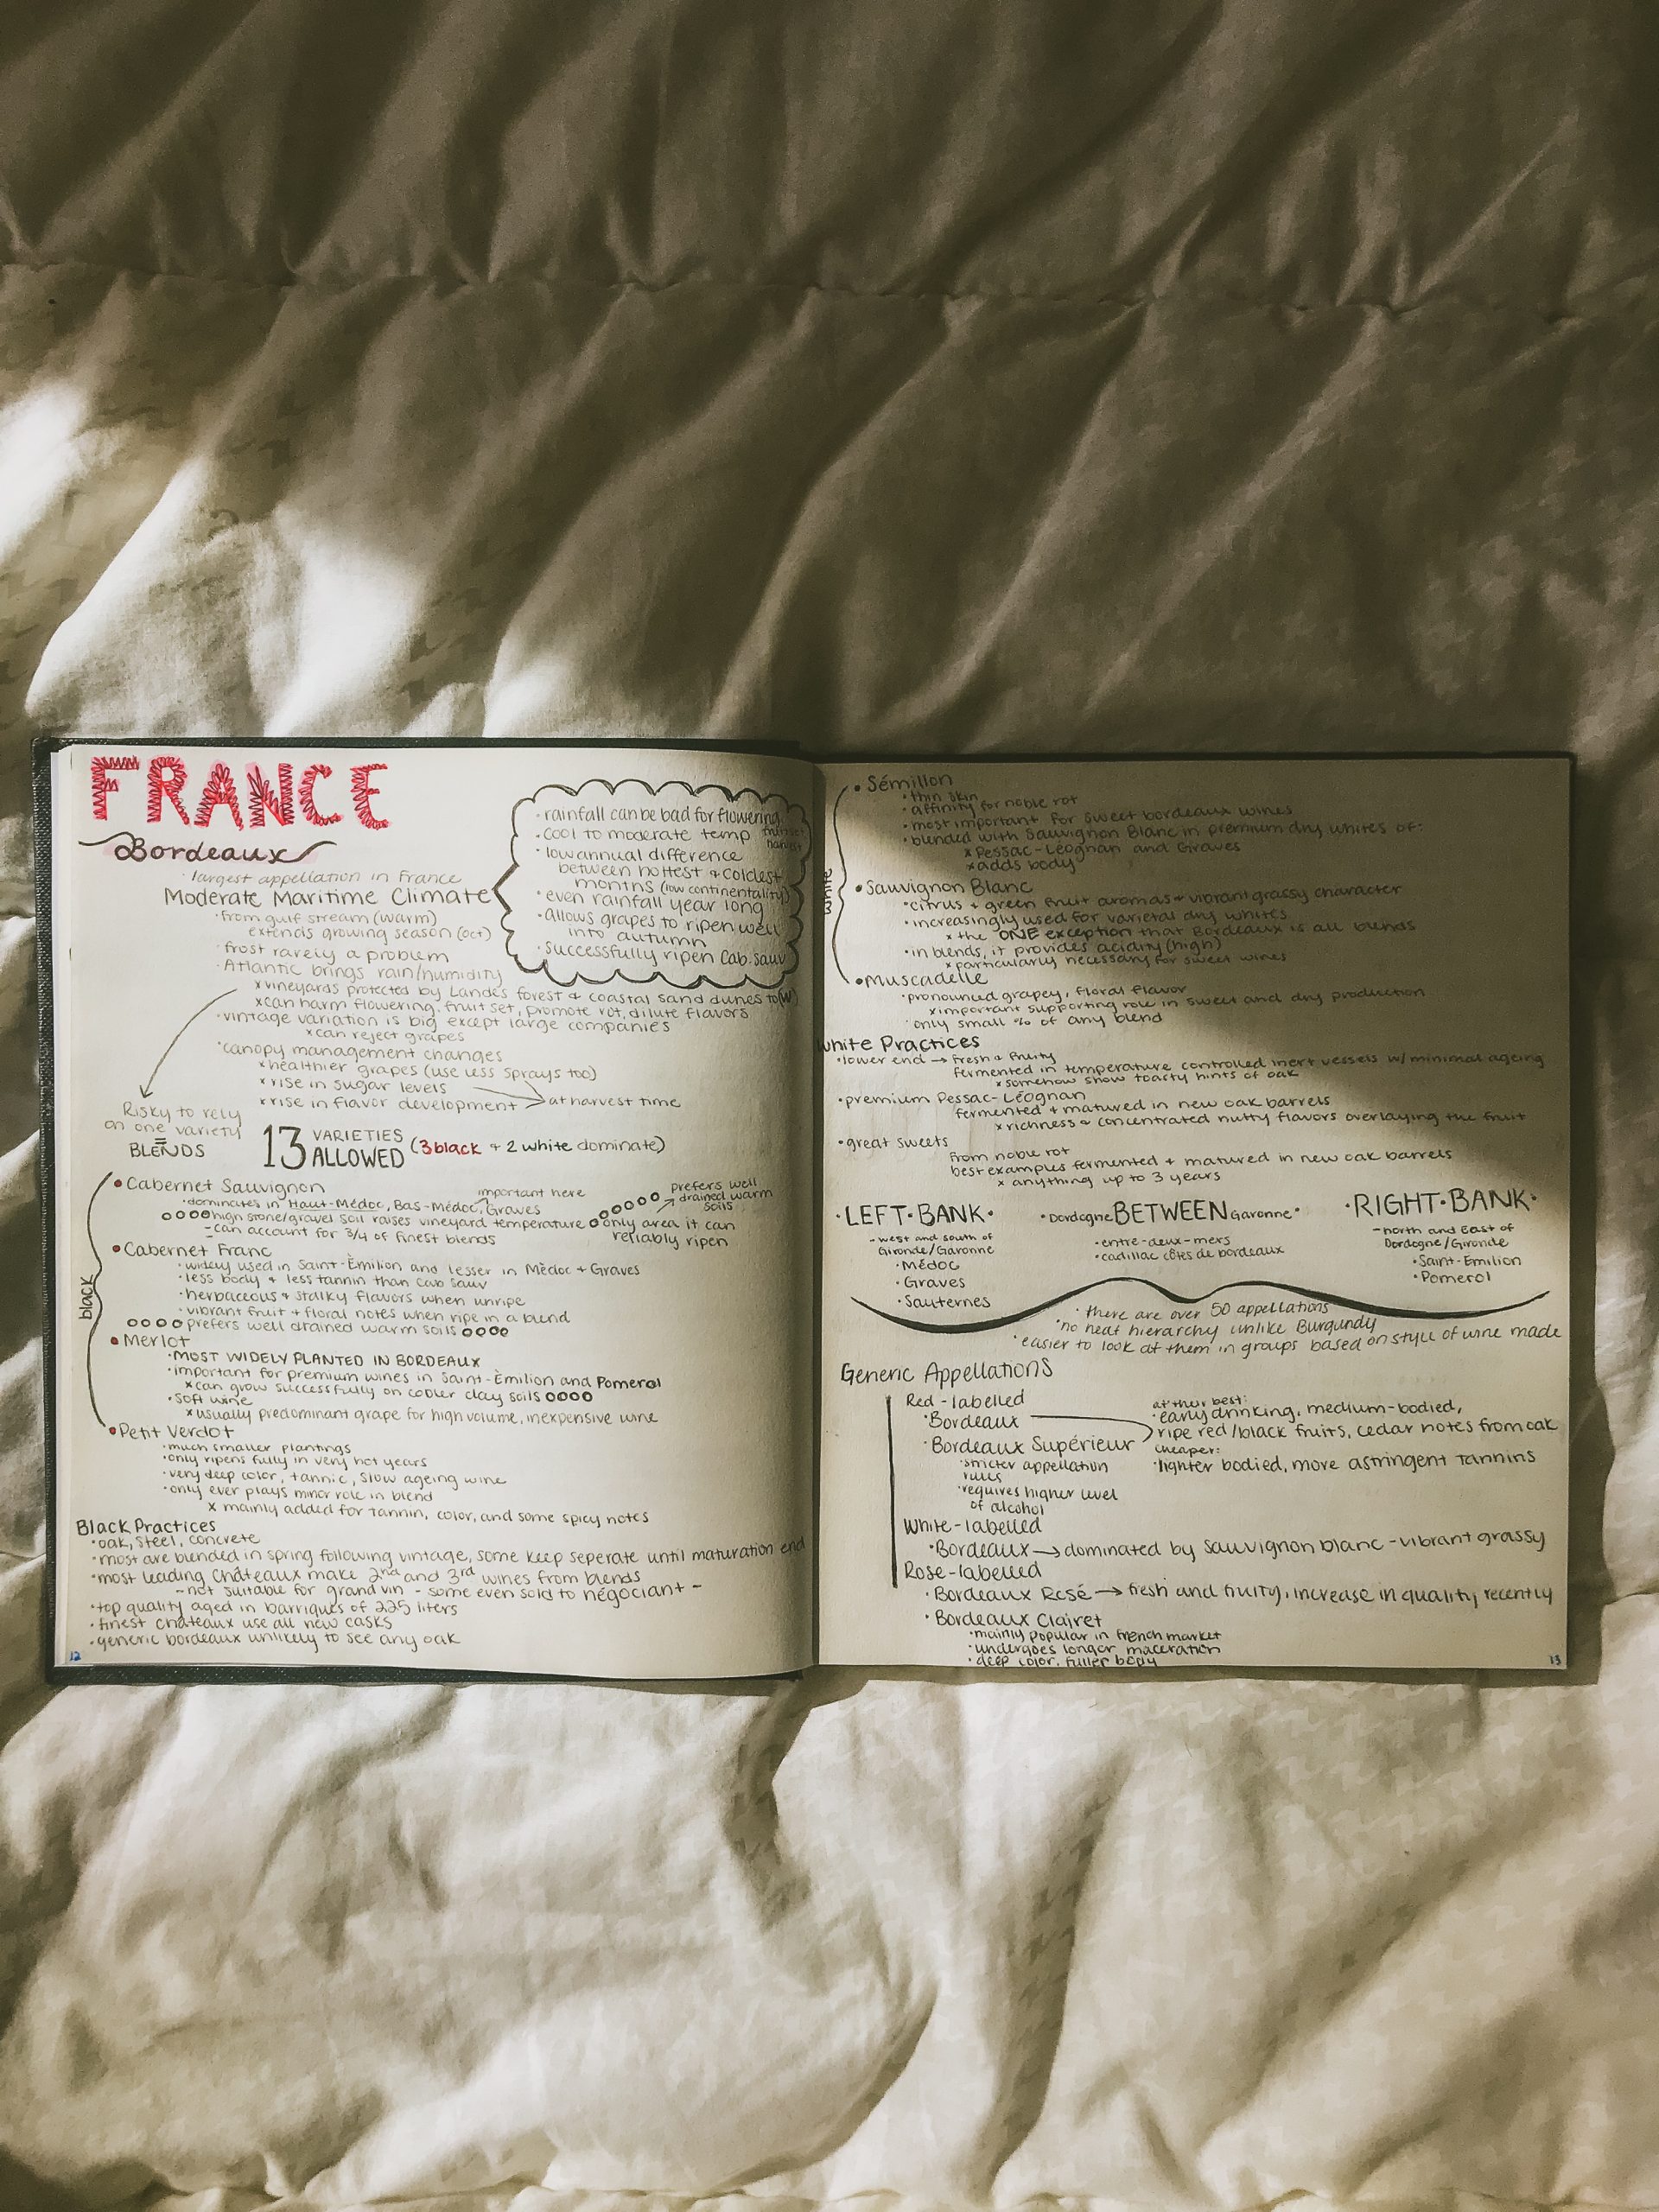 Student's journal about France.